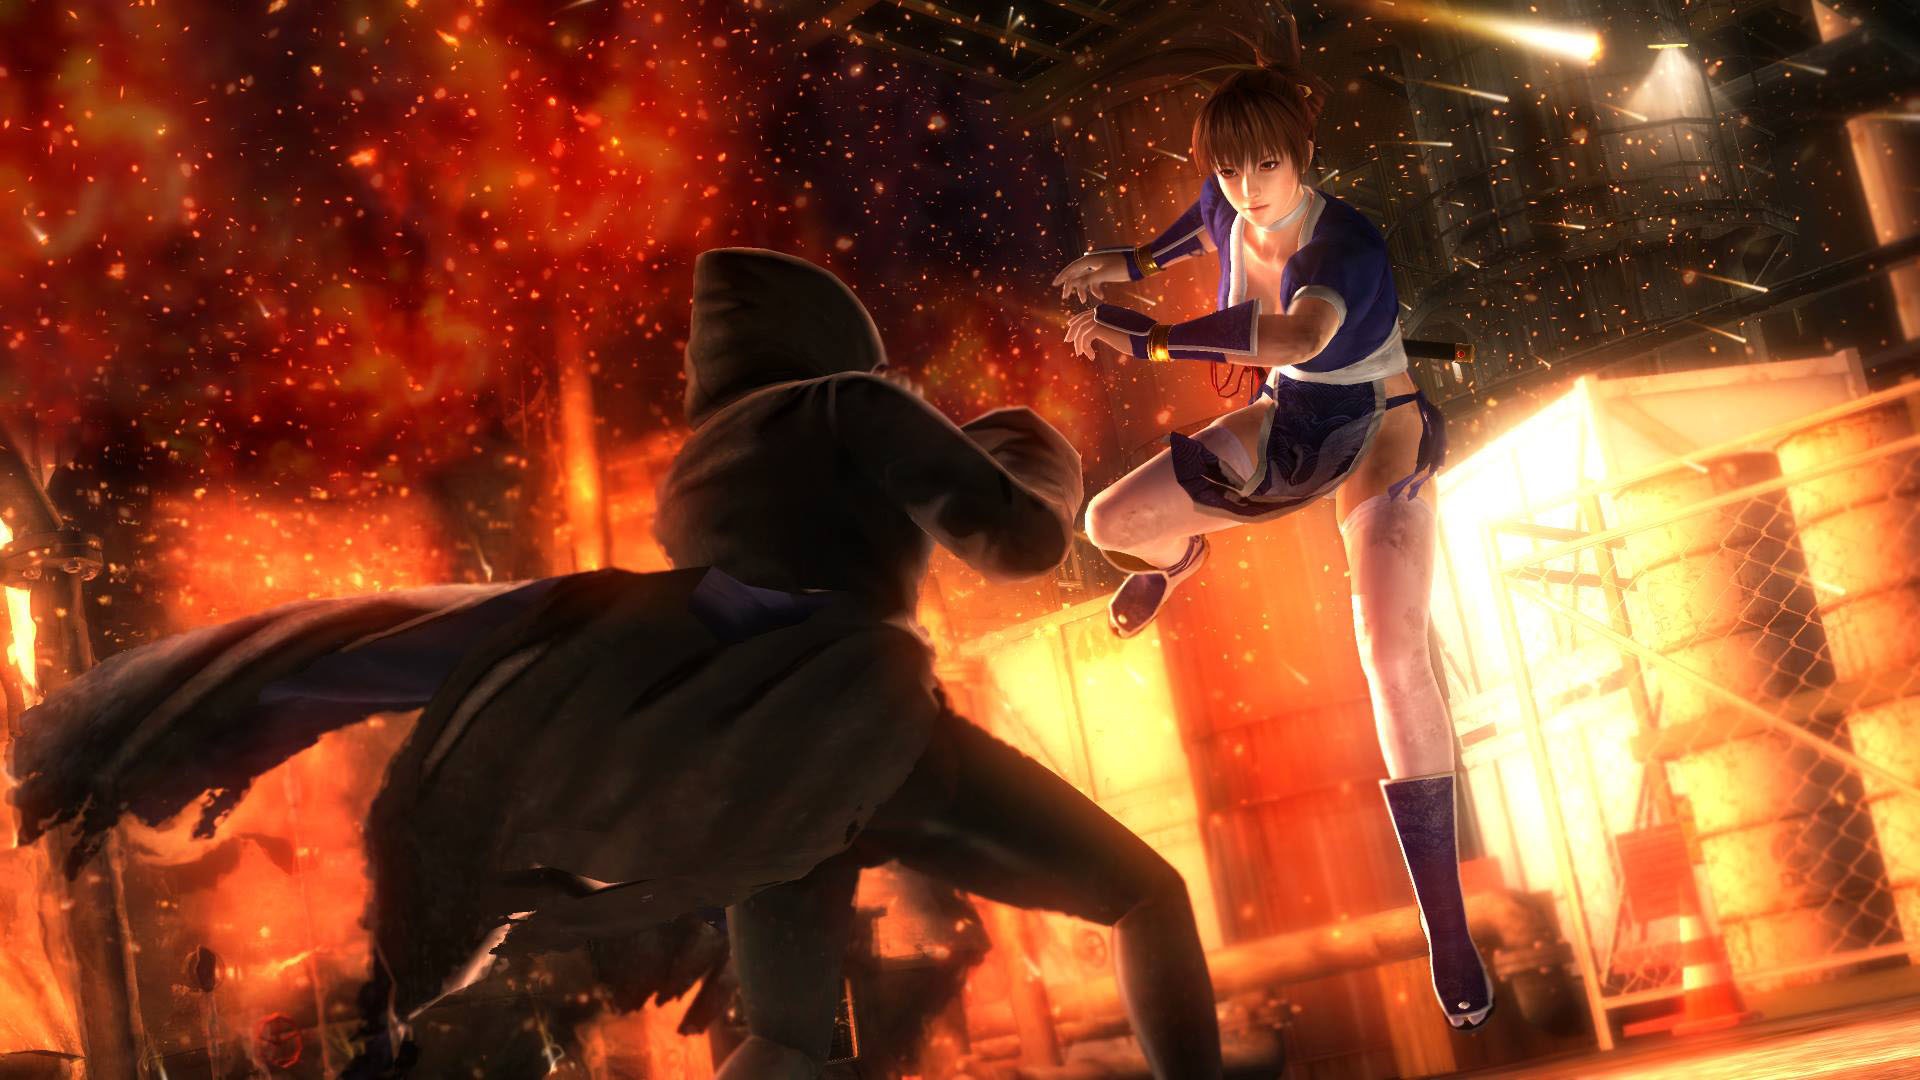 Dead Or Alive 5 Last Round Will Let You Transfer Dlc From Xbox 360 And Ps3 To Xb1 And Ps4 Siliconera